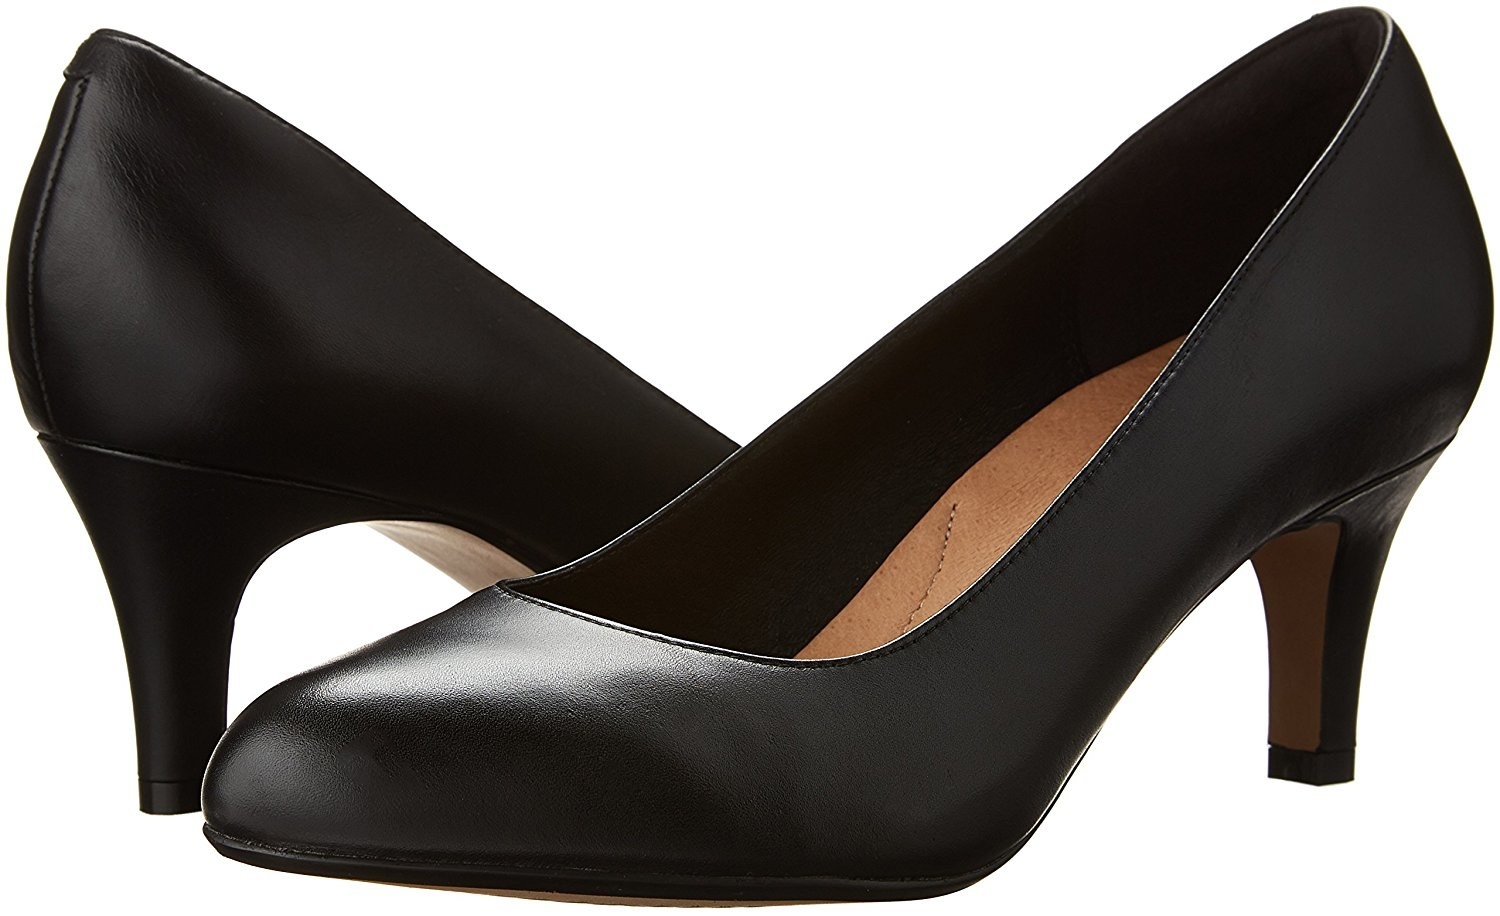 25 Pairs Of Heels For People Who Usually Hate Heels